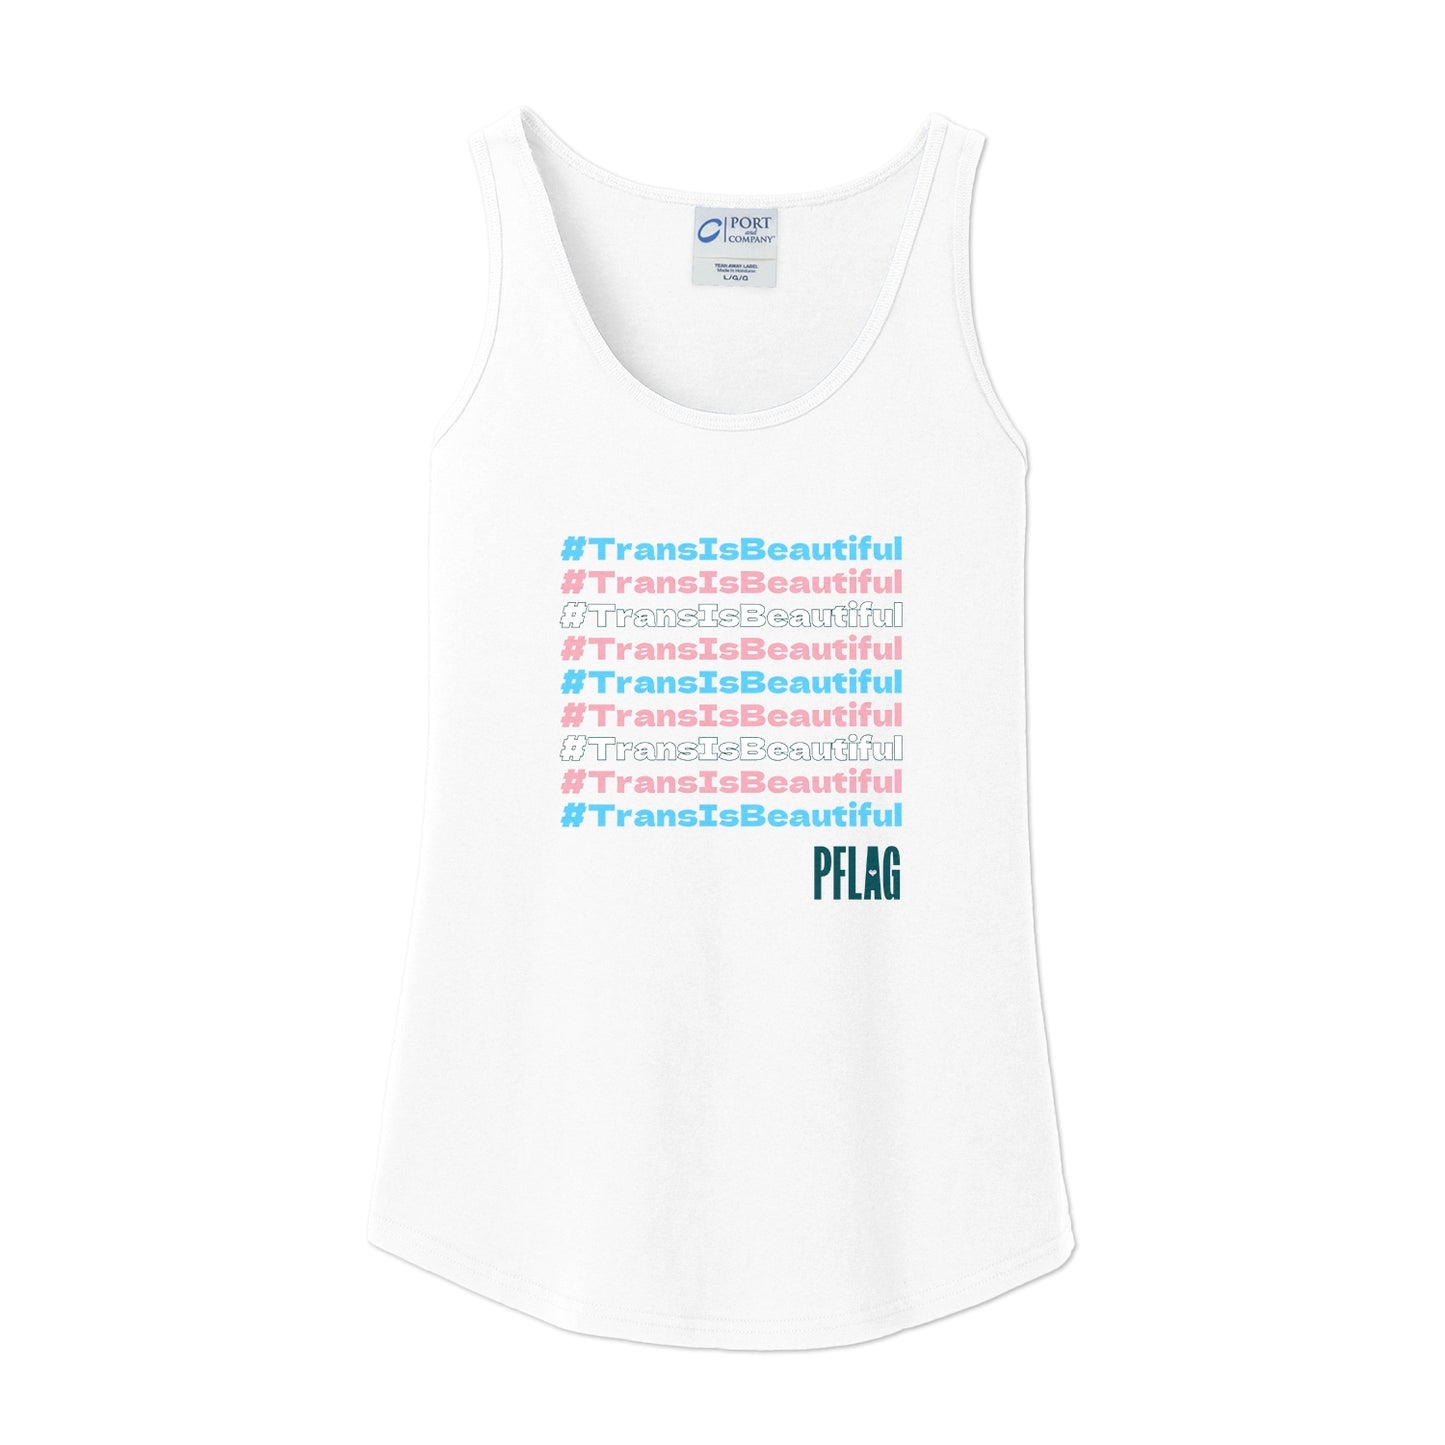 #TransIsBeautiful - TransPride Colors - Fitted-Cut Tank Top